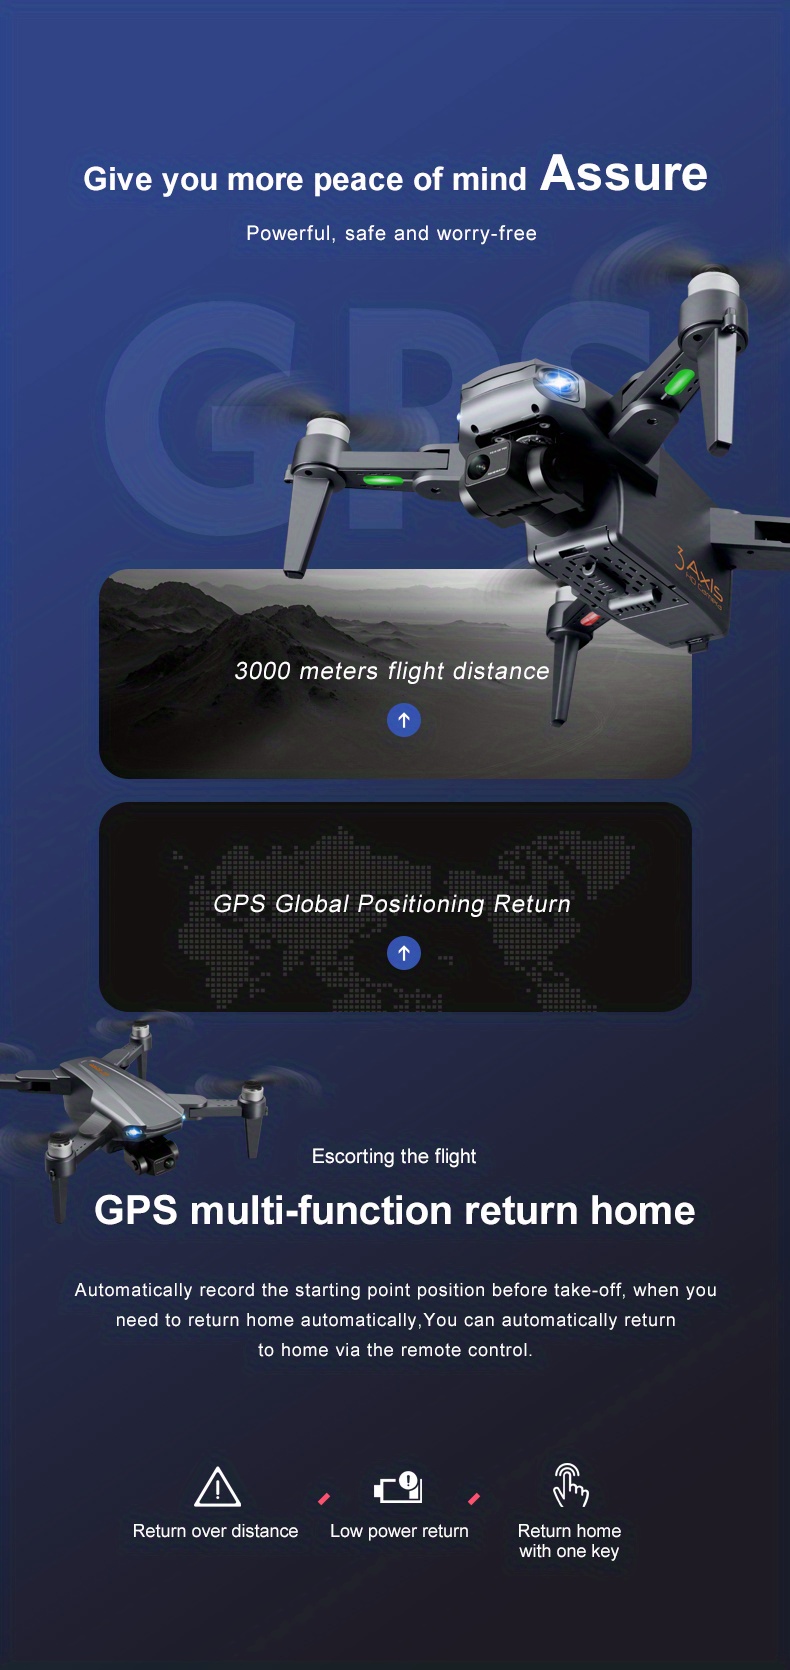 rg106 5g professional brushless gps drone three axis mechanical gimbal camera 1km image transmission 360 obstacle avoidance one key return flight for about 25 30 minutes details 4